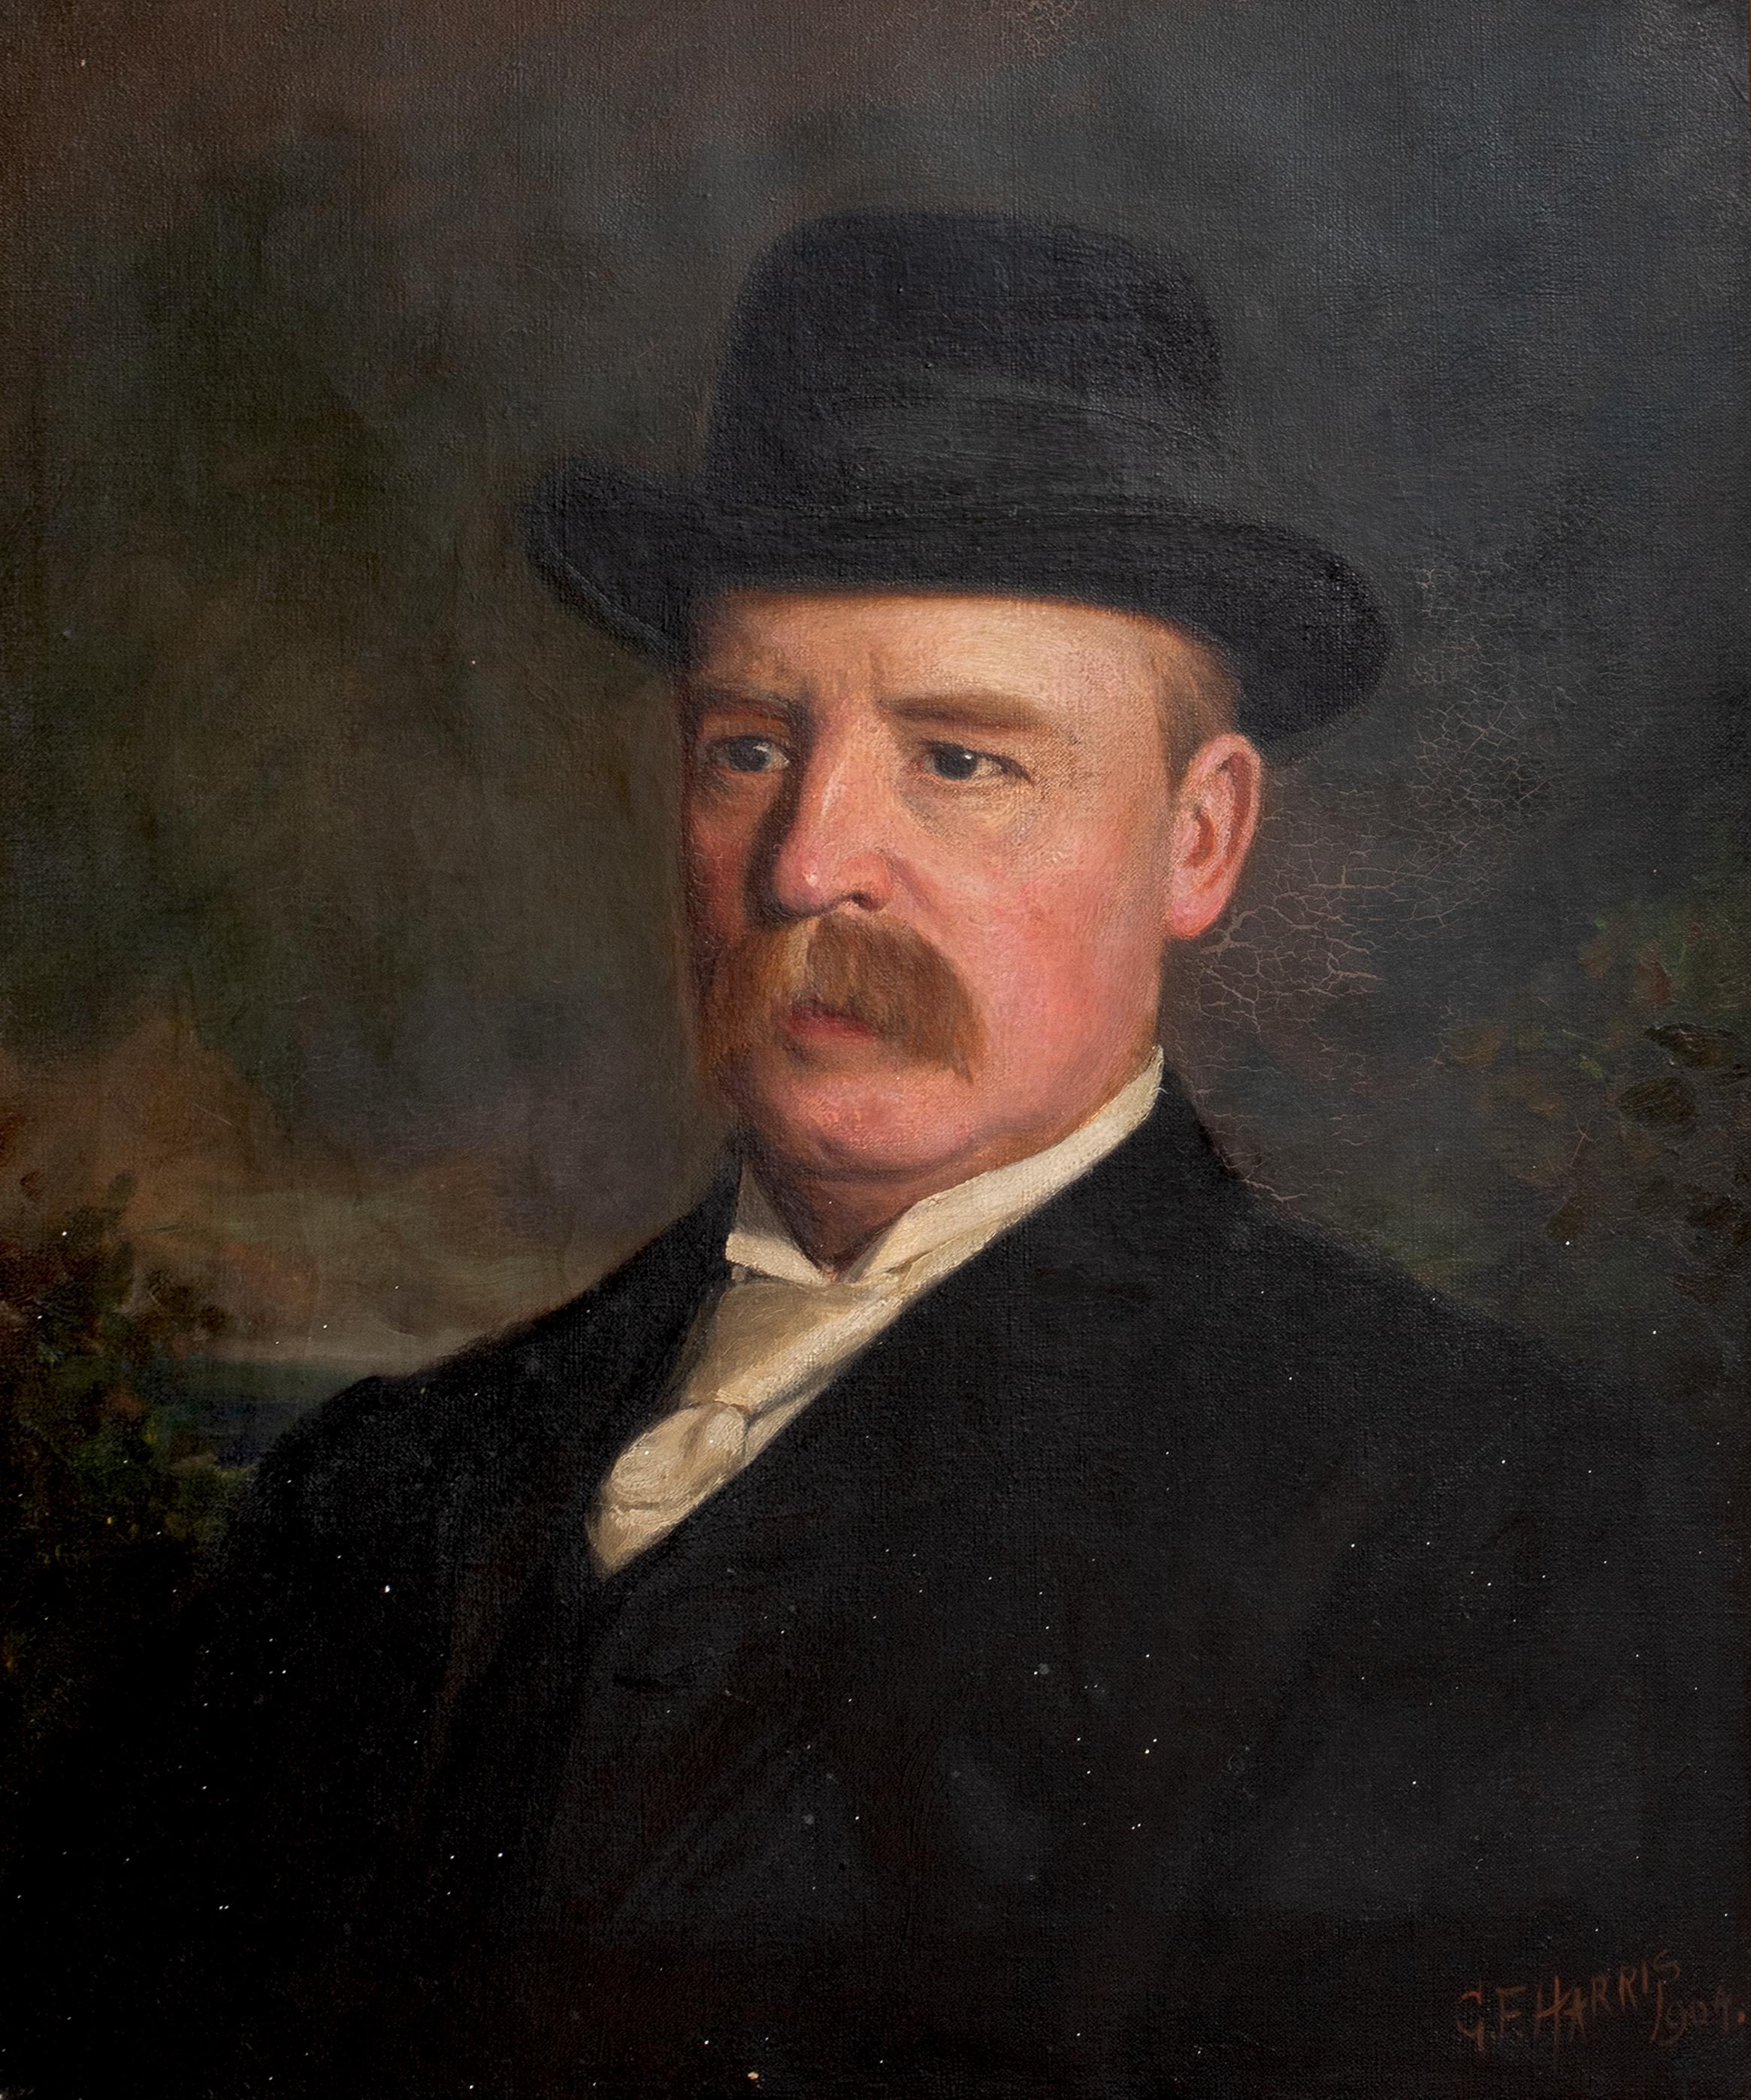 Portrait Of An Birmingham Industrialist, dated 1904 

by George F. HARRIS   (1856-1924) Birmingham Society Painter

Large 1904 Late Victorian era portrait of a Birmingham Industrialist, oil on canvas by George F Harris. Excellent quality and